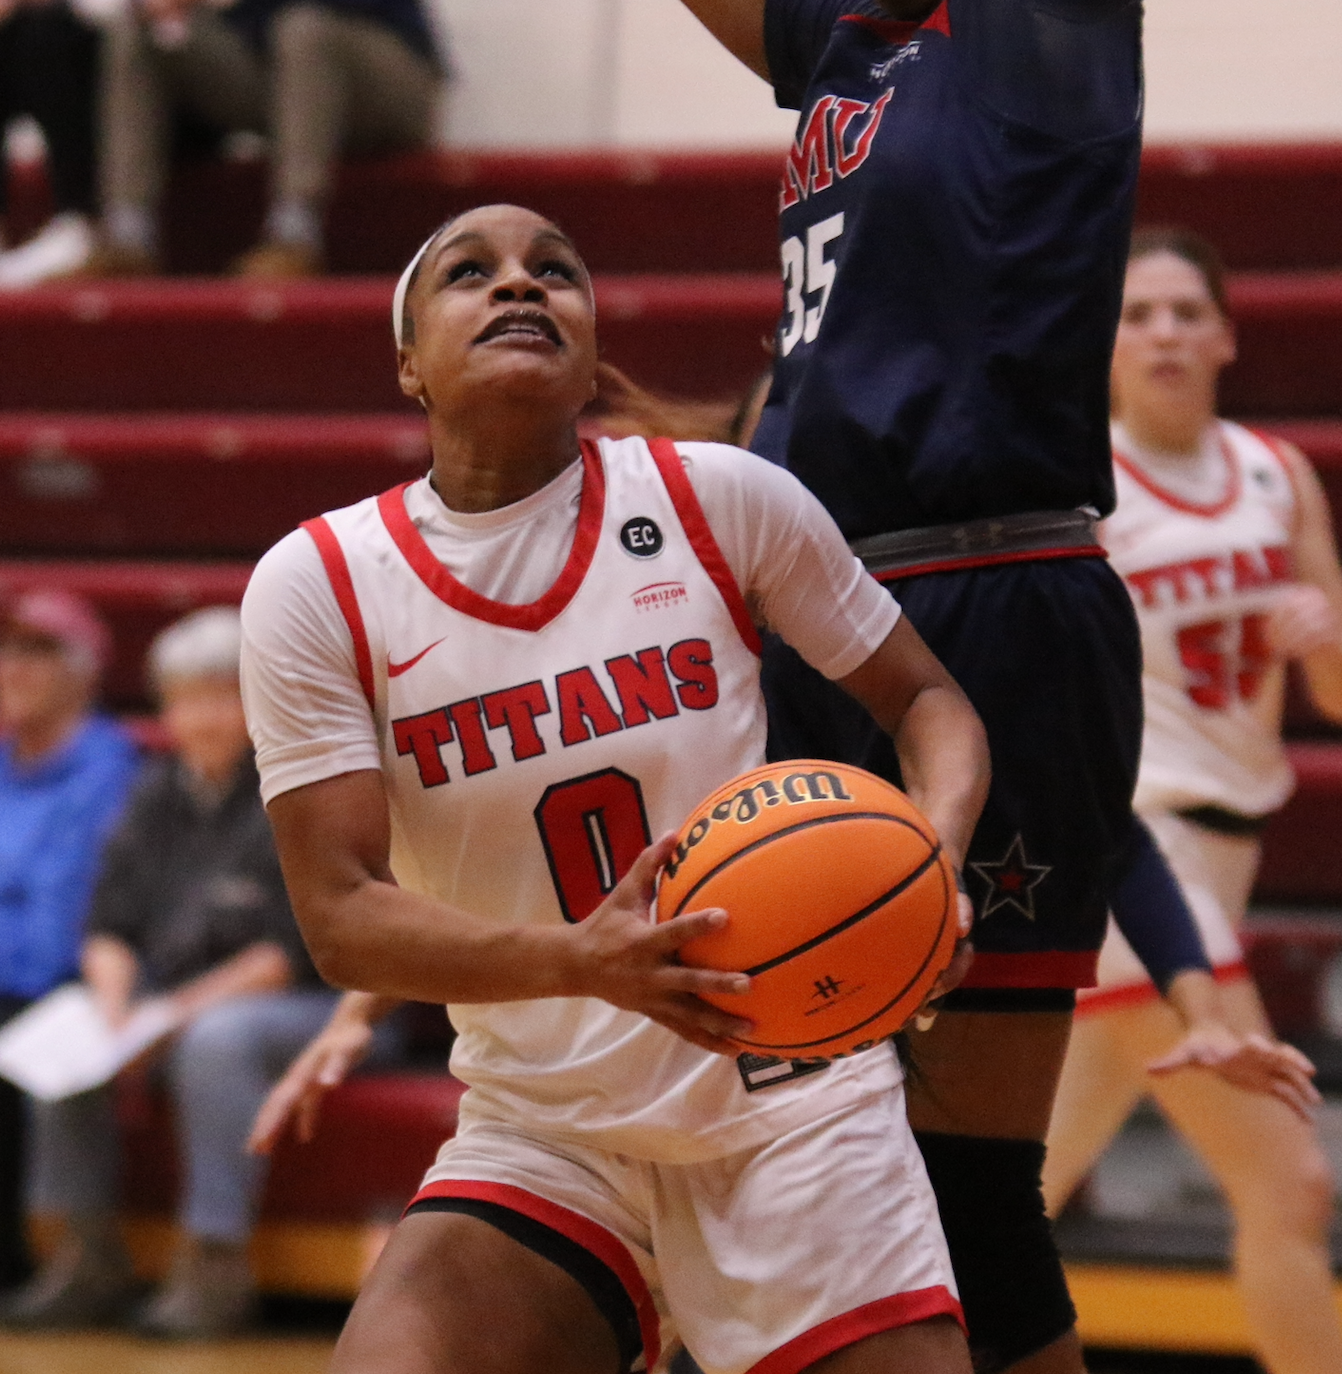 Imani McNeal and the women's basketball team at Detroit Mercy held off Robert Morris, 59-48, in the first round of the Horizon League tournament at Calihan Hall on Tuesday night.